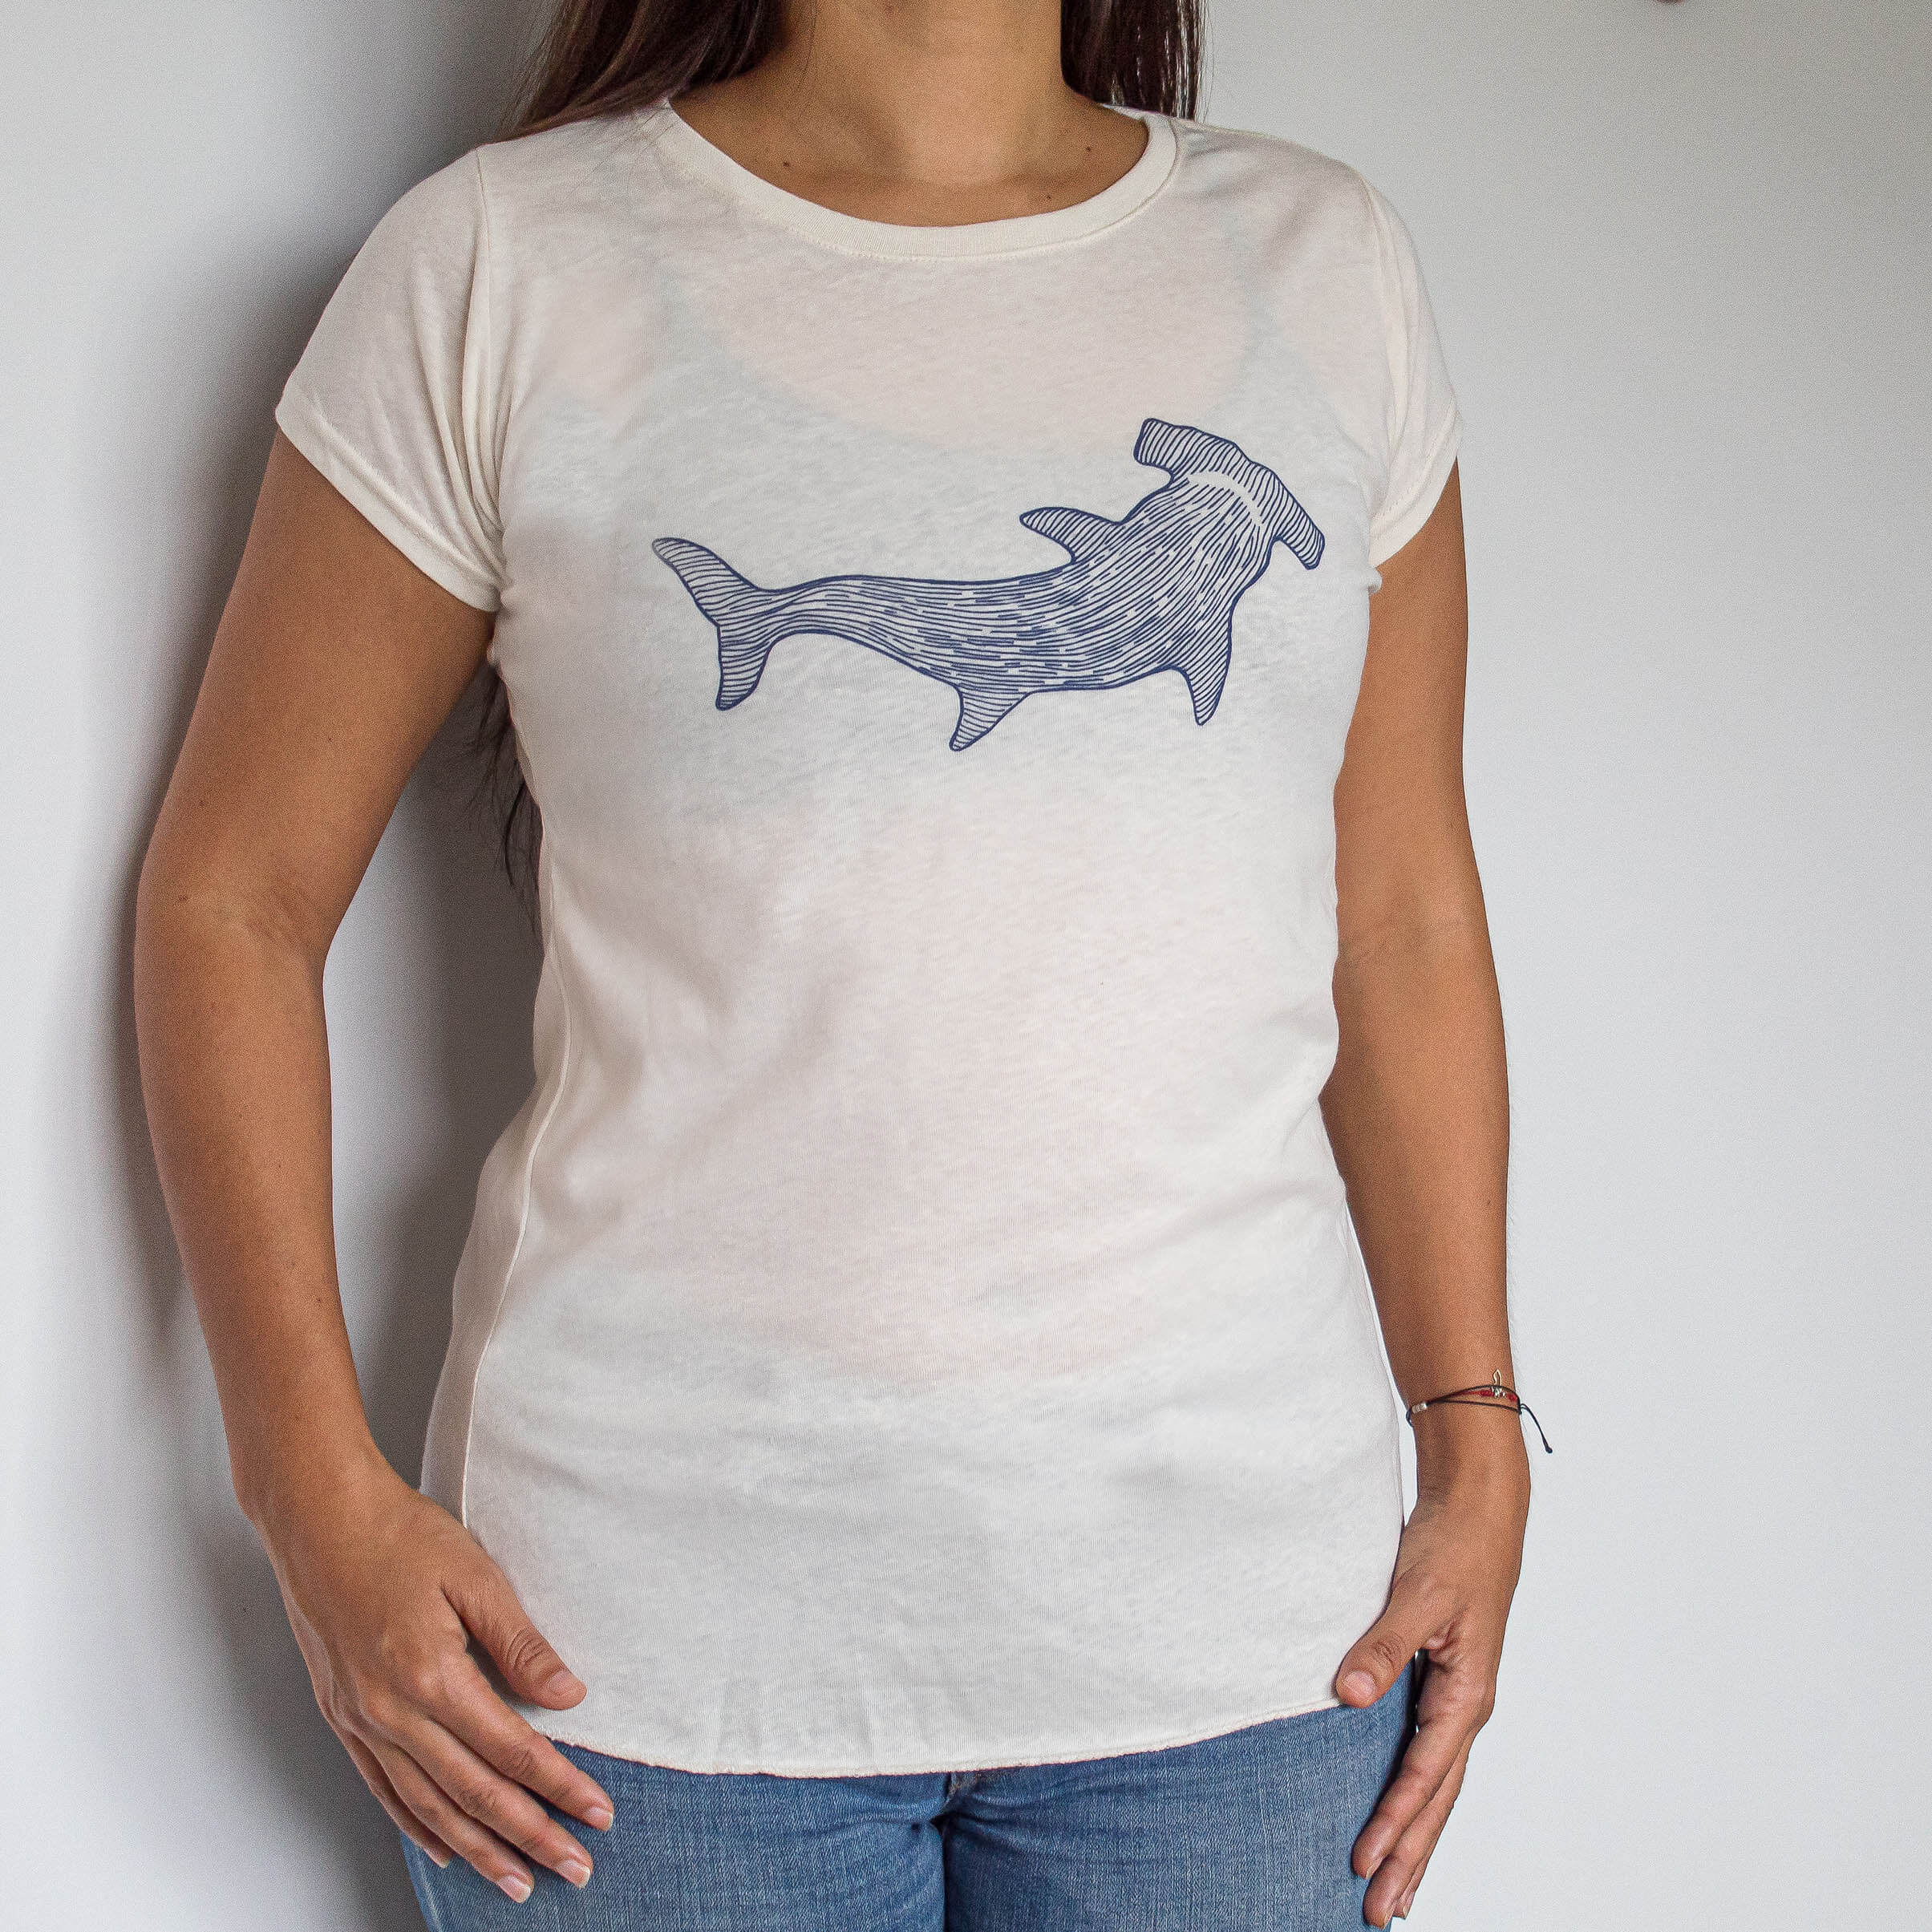 Hammerhead Shirt - Salinas Bay  Science Research and Online Shop